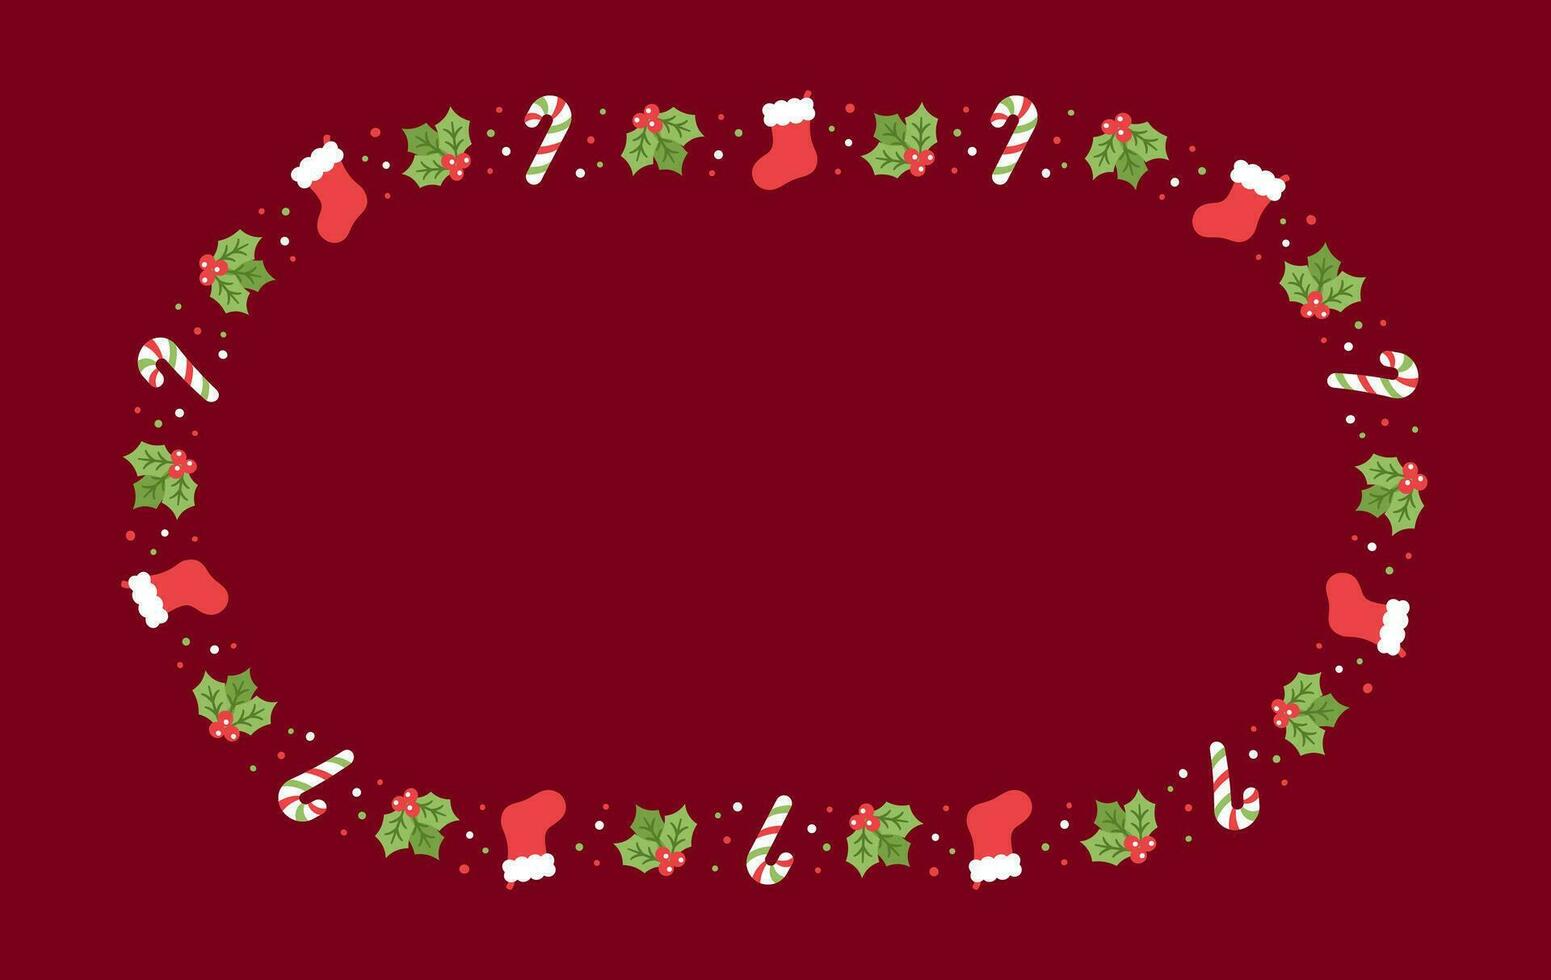 Oval Christmas Frame Border, Winter Holiday Graphics. Cute Mistletoe, Stocking and Candy Cane pattern, card and social media post template vector illustration.